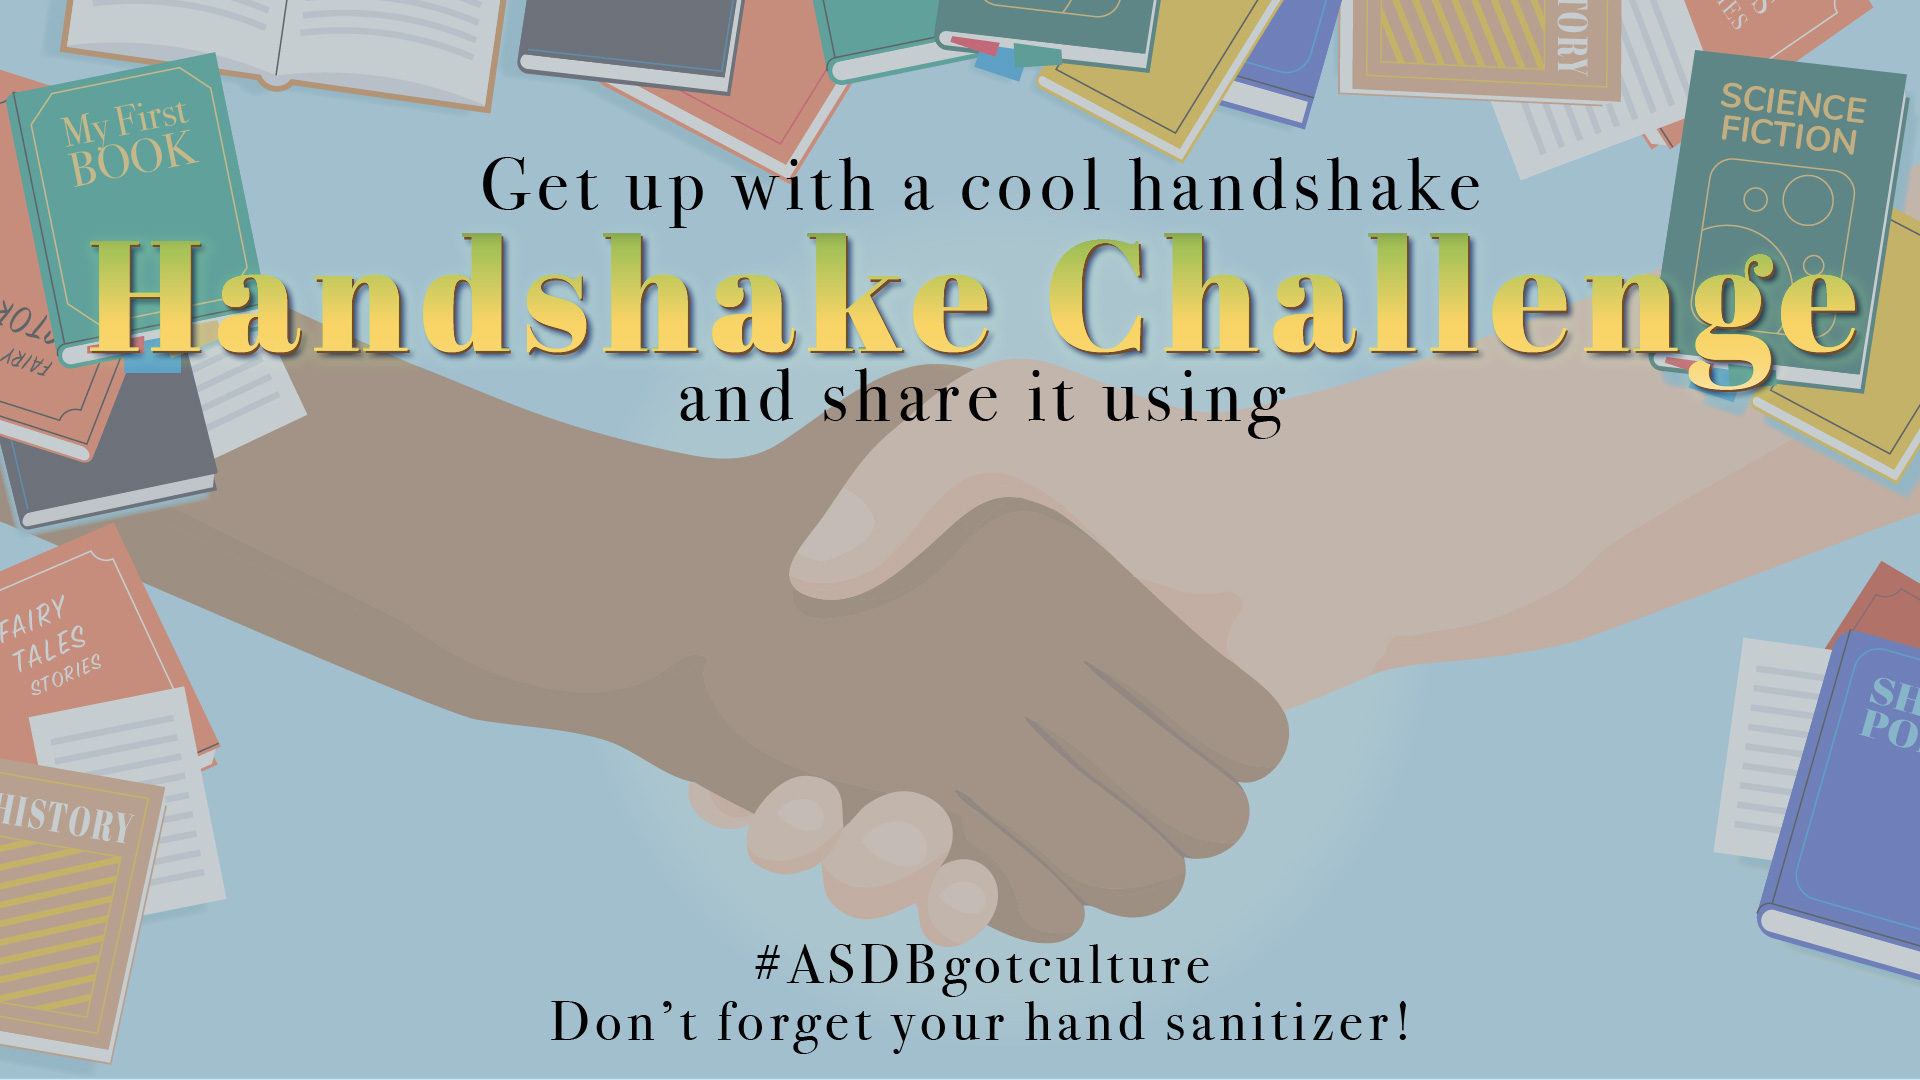 Books border, headline- first line: Get up a cool handshake second line: Handshake Challenge third line: and share it using graphics of two person handshake Bottom fourth line: #ASDBgotculture fifth line: Don't forget your hand sanitizer!